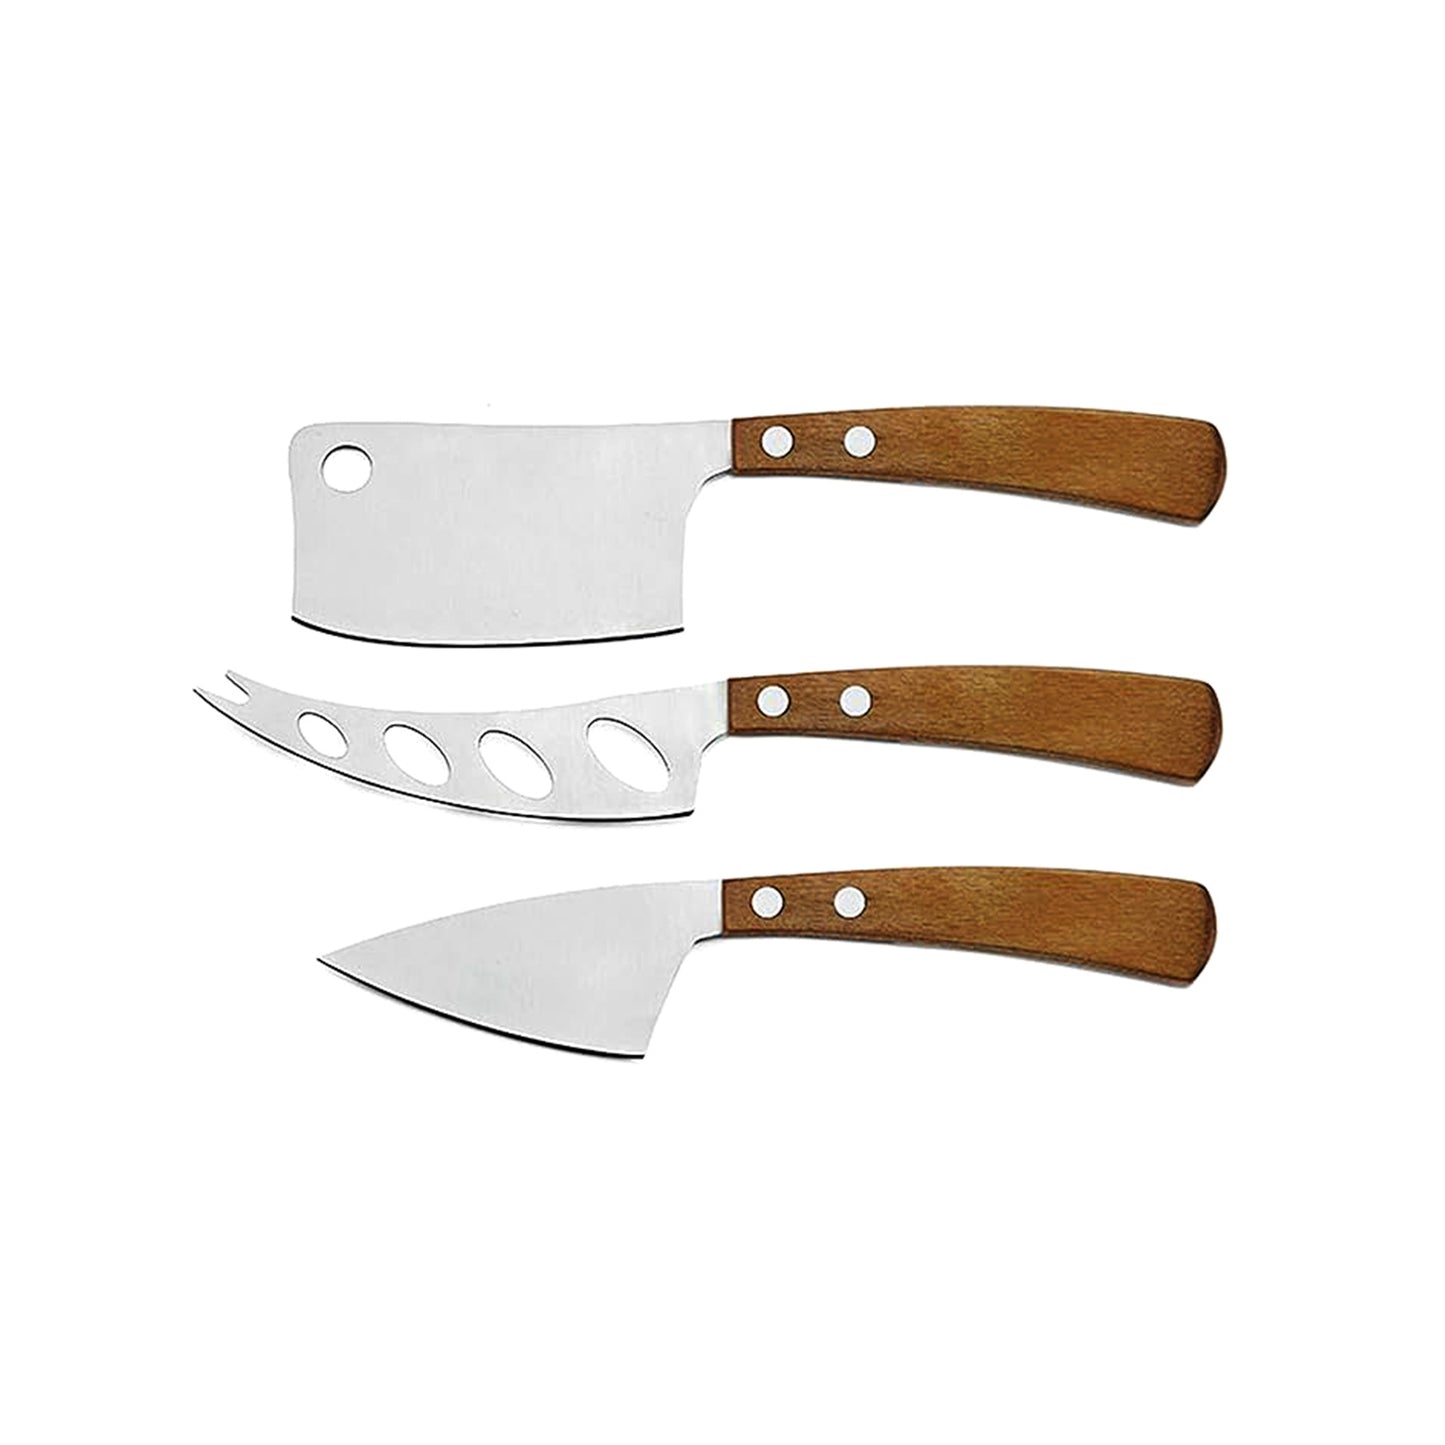 3-Piece Cheese Knife Set with Wooden Handles